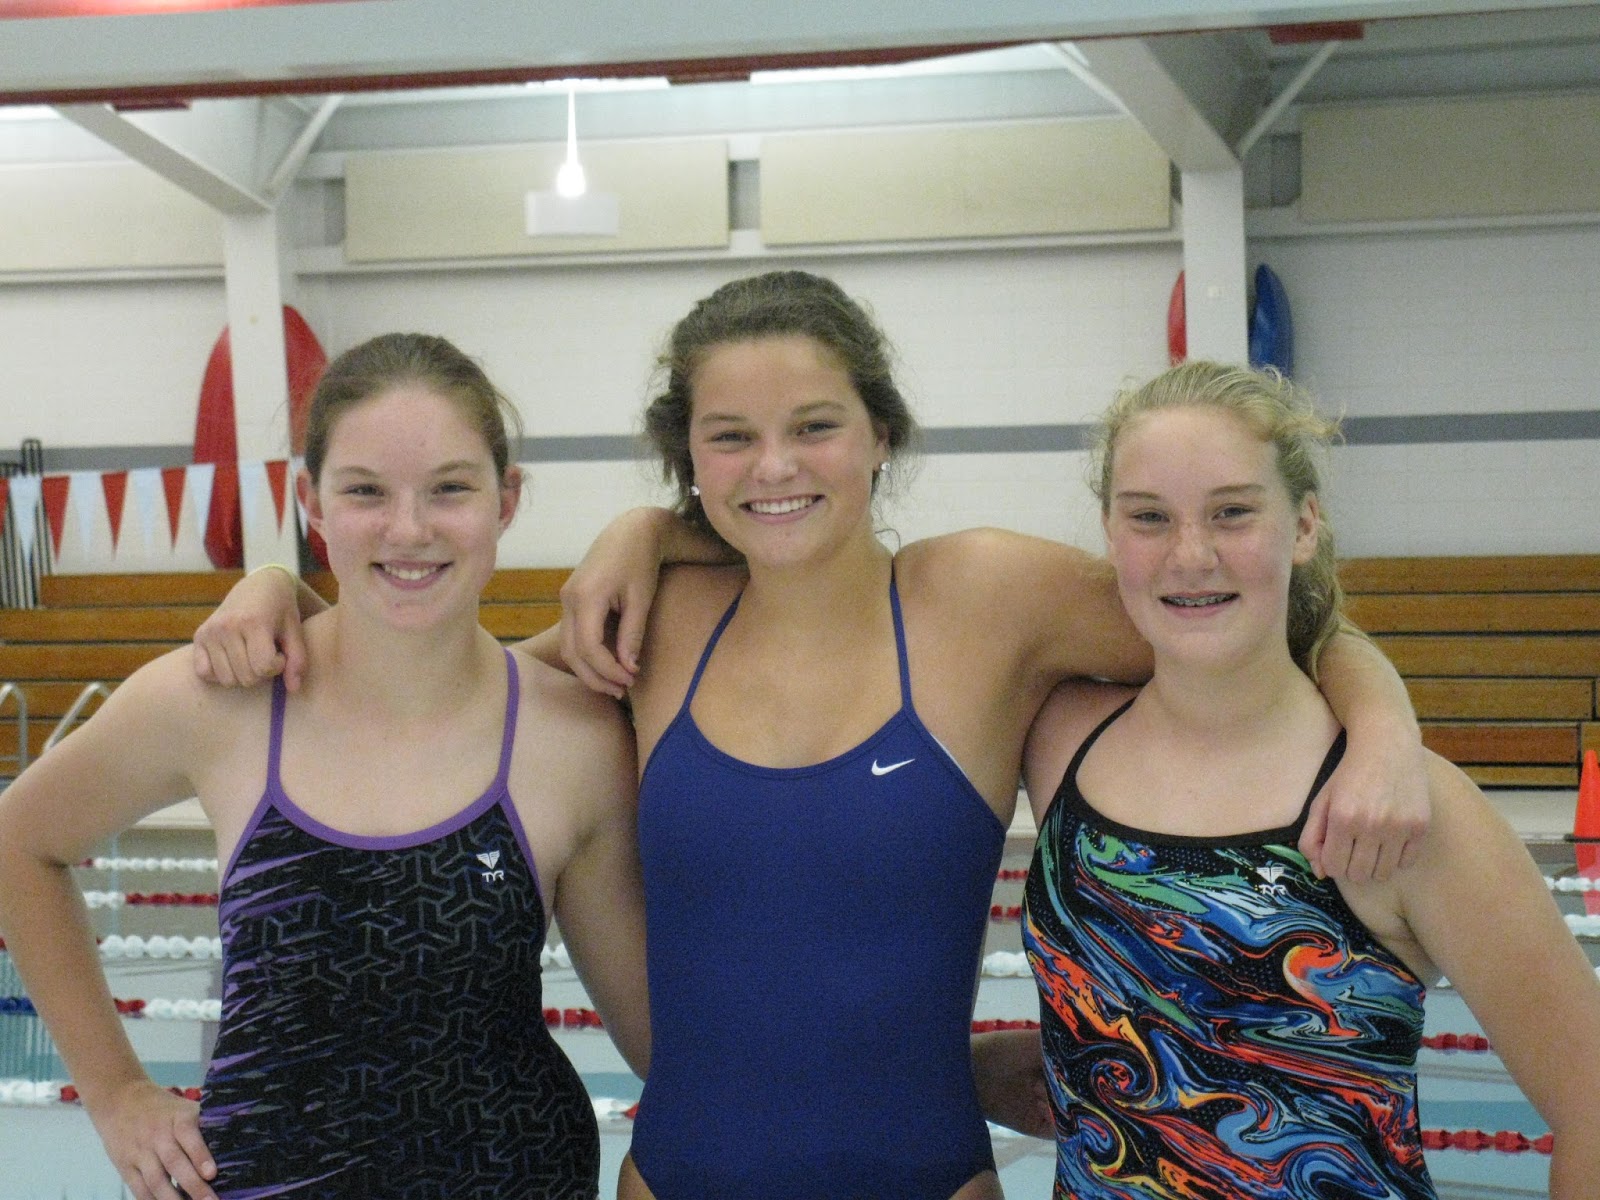 NHS Rocket Swimming and Diving Team: Athletes of the Week